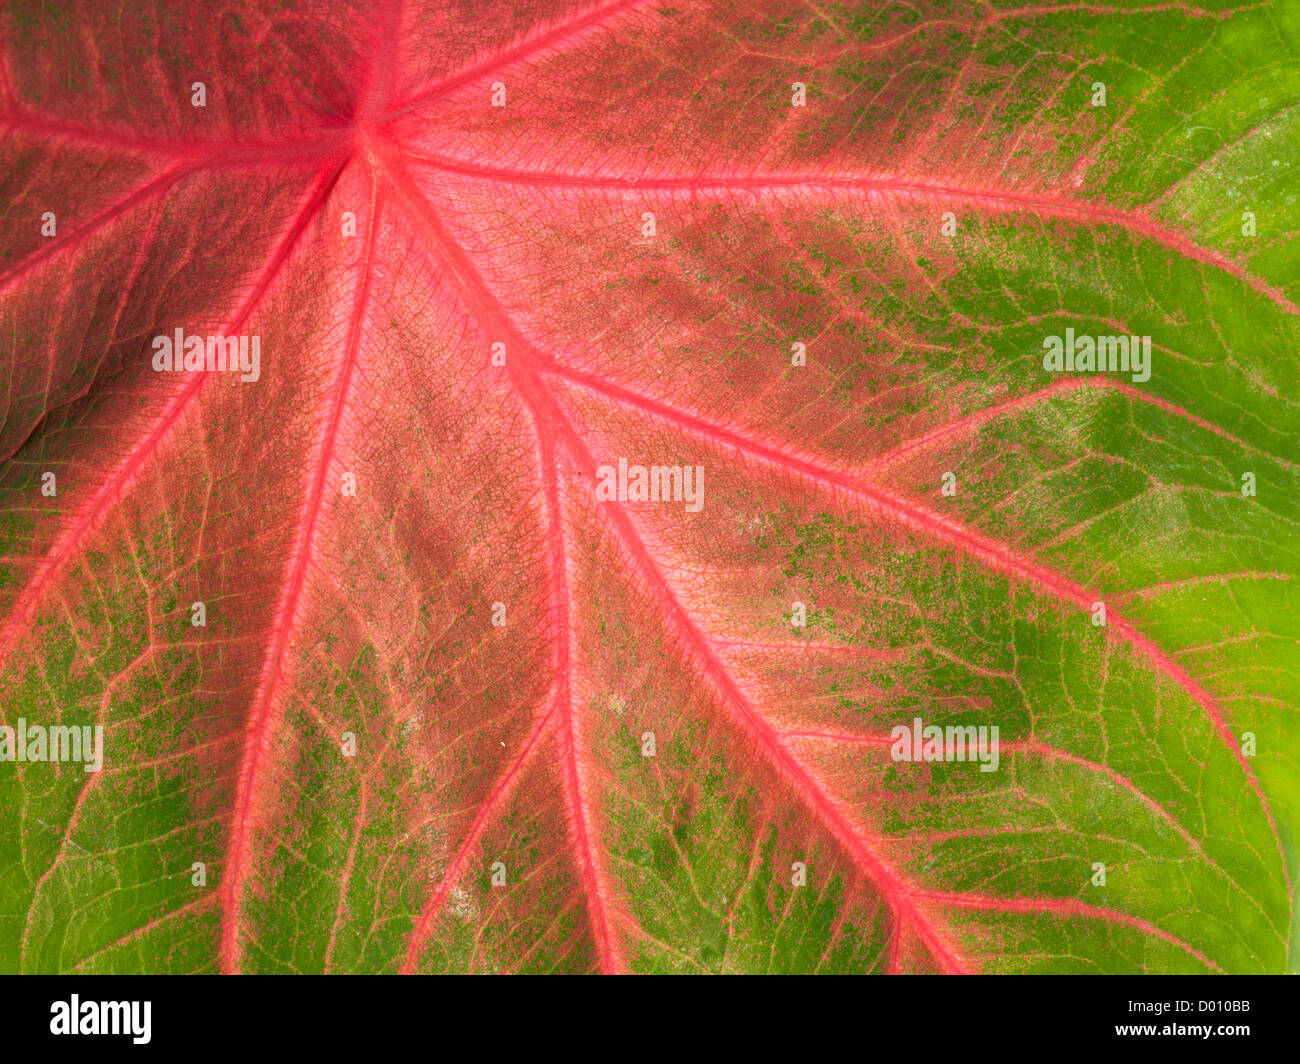 Close-up of a colorful green and pink leaf with veins making beautiful natural pattern Stock Photo